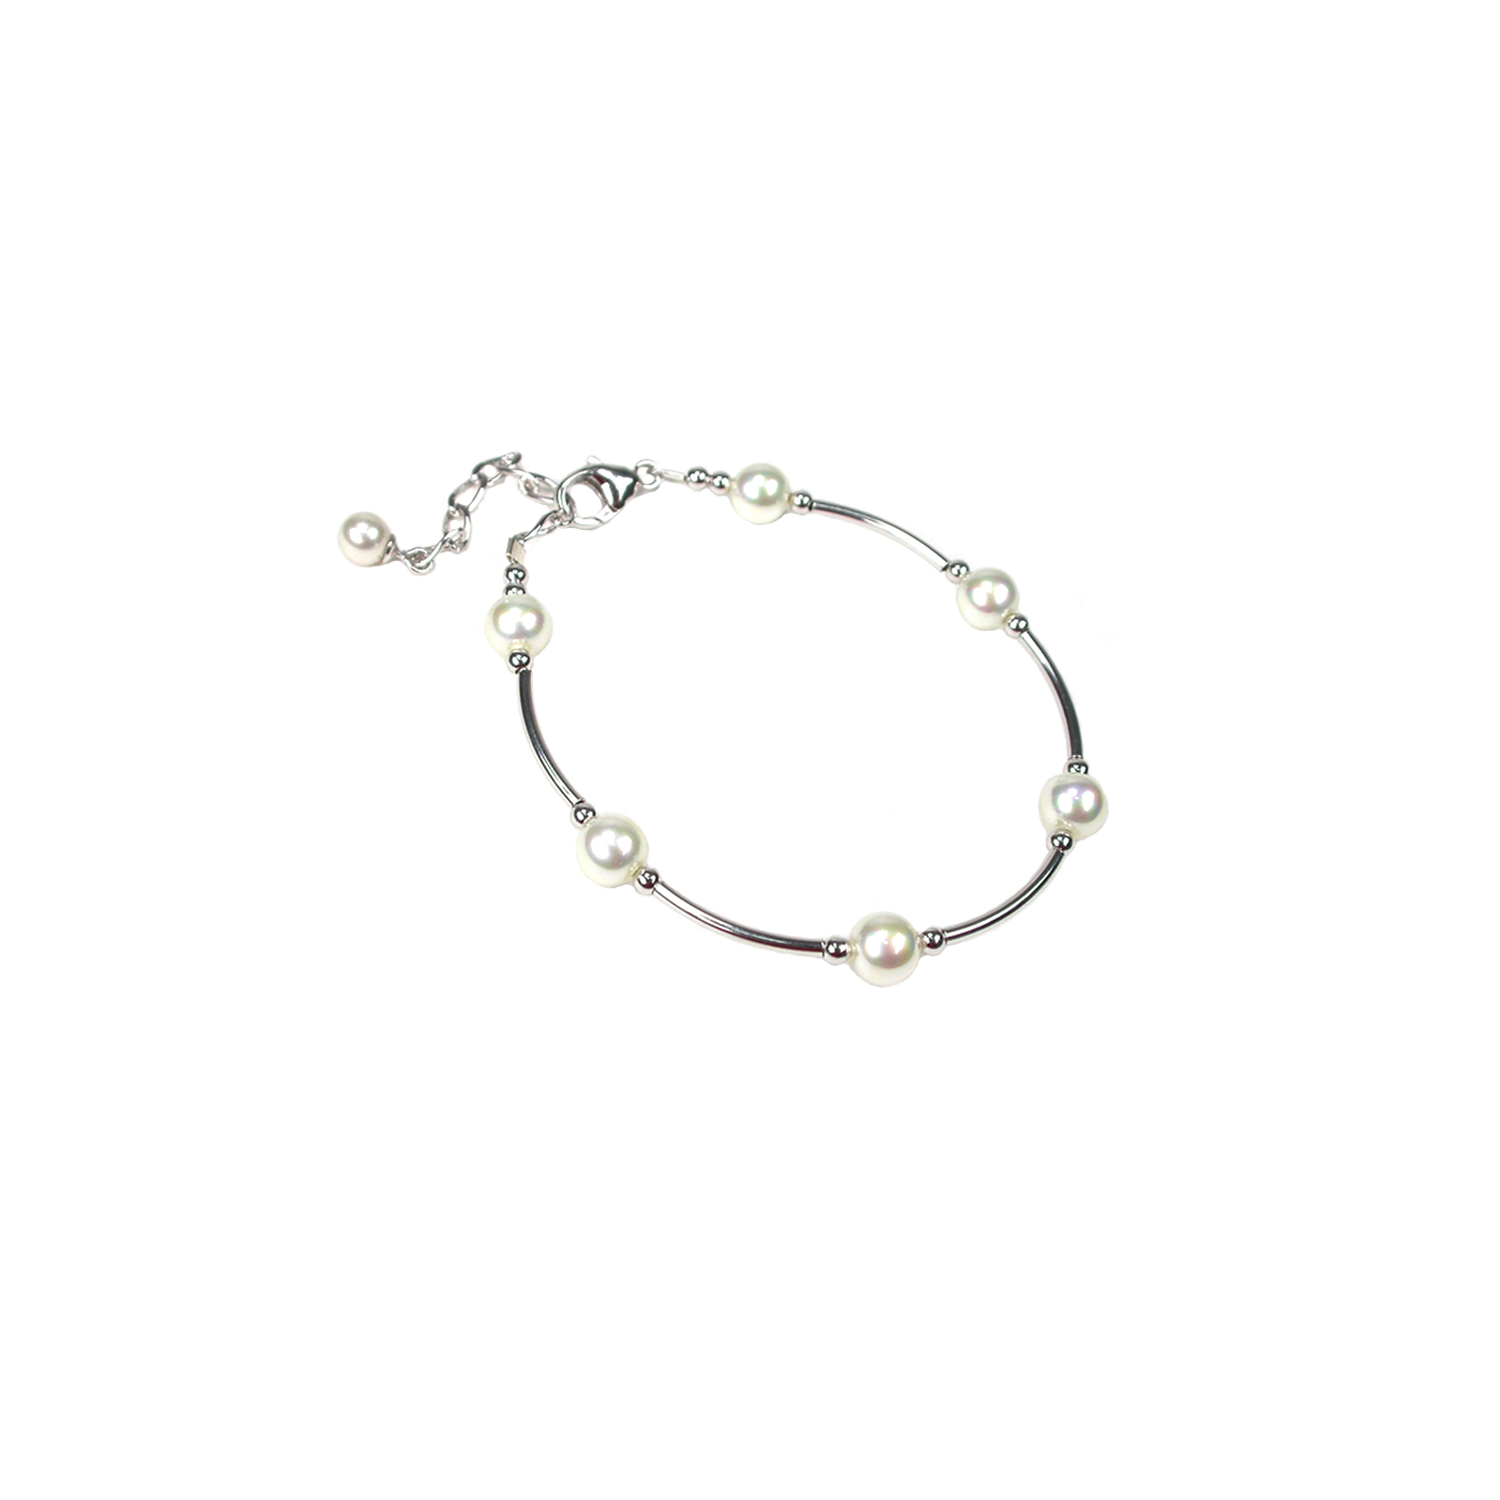 Silver Bracelet with Pearls